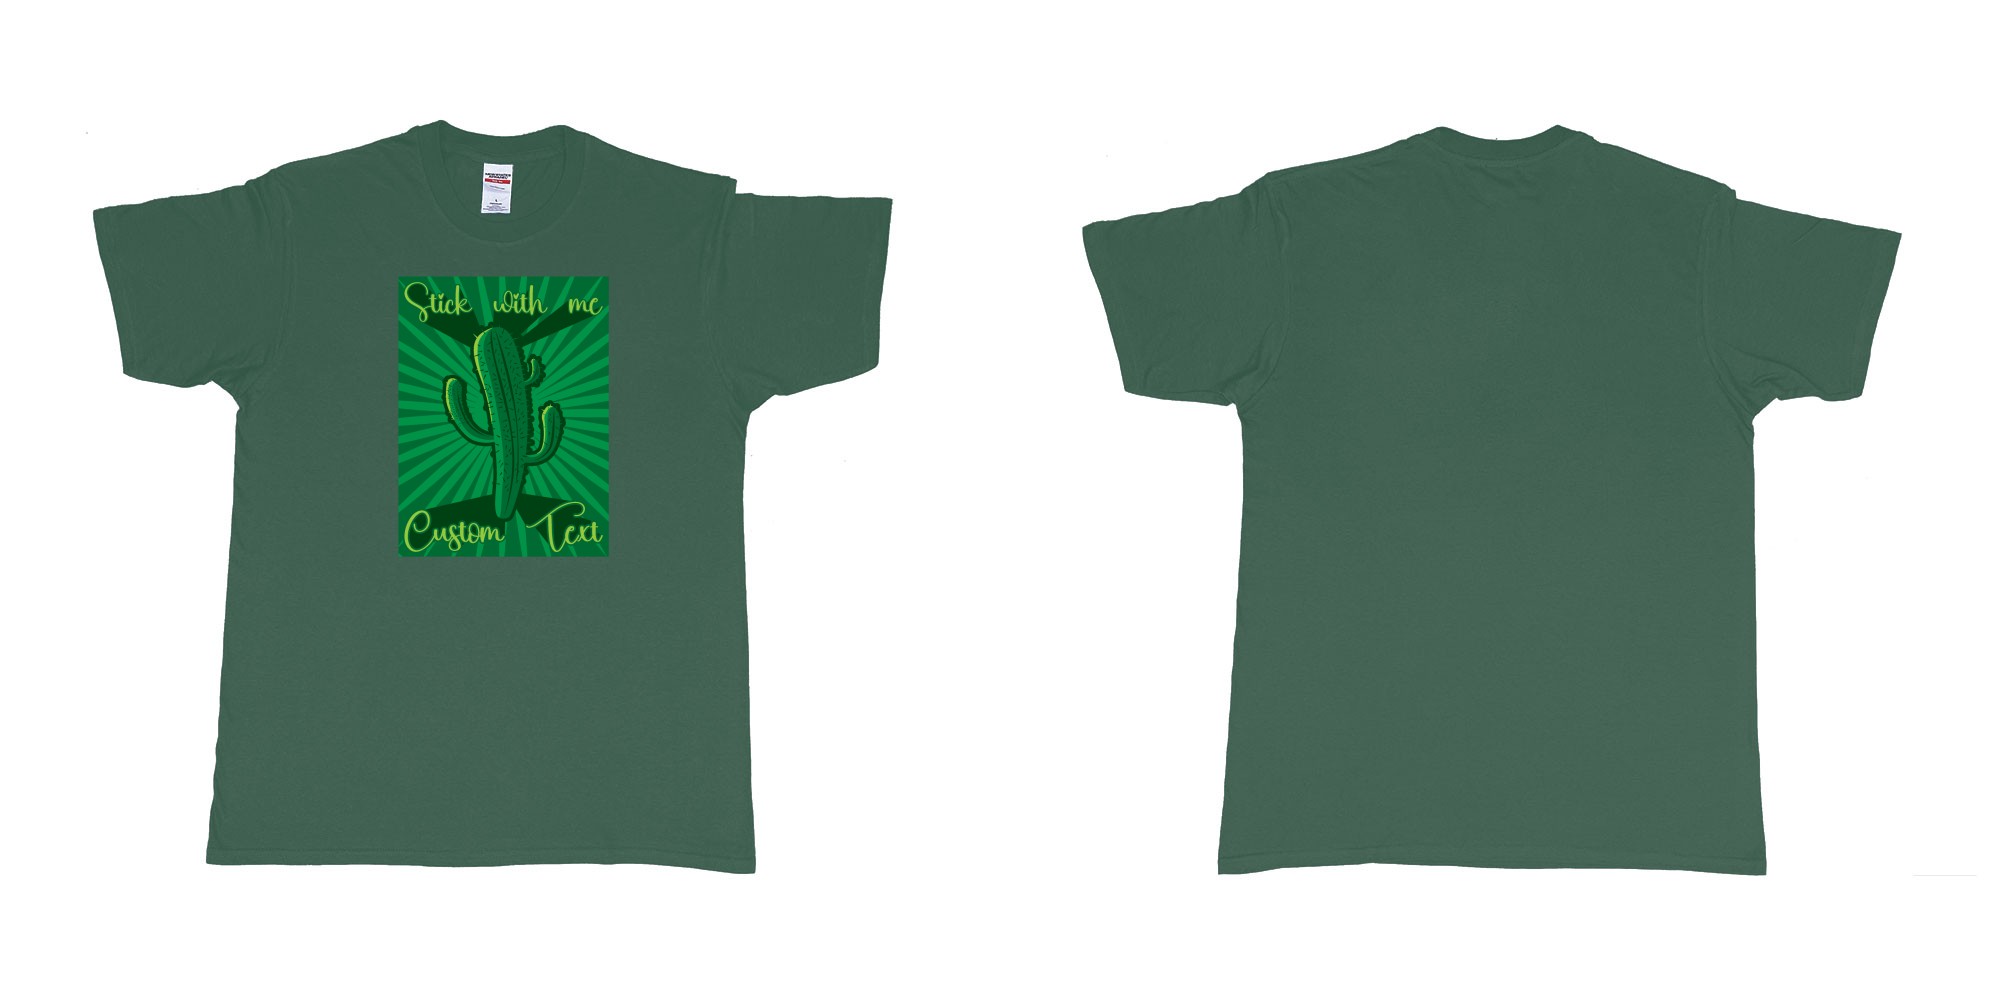 Custom tshirt design cactus stick with me in fabric color forest-green choice your own text made in Bali by The Pirate Way